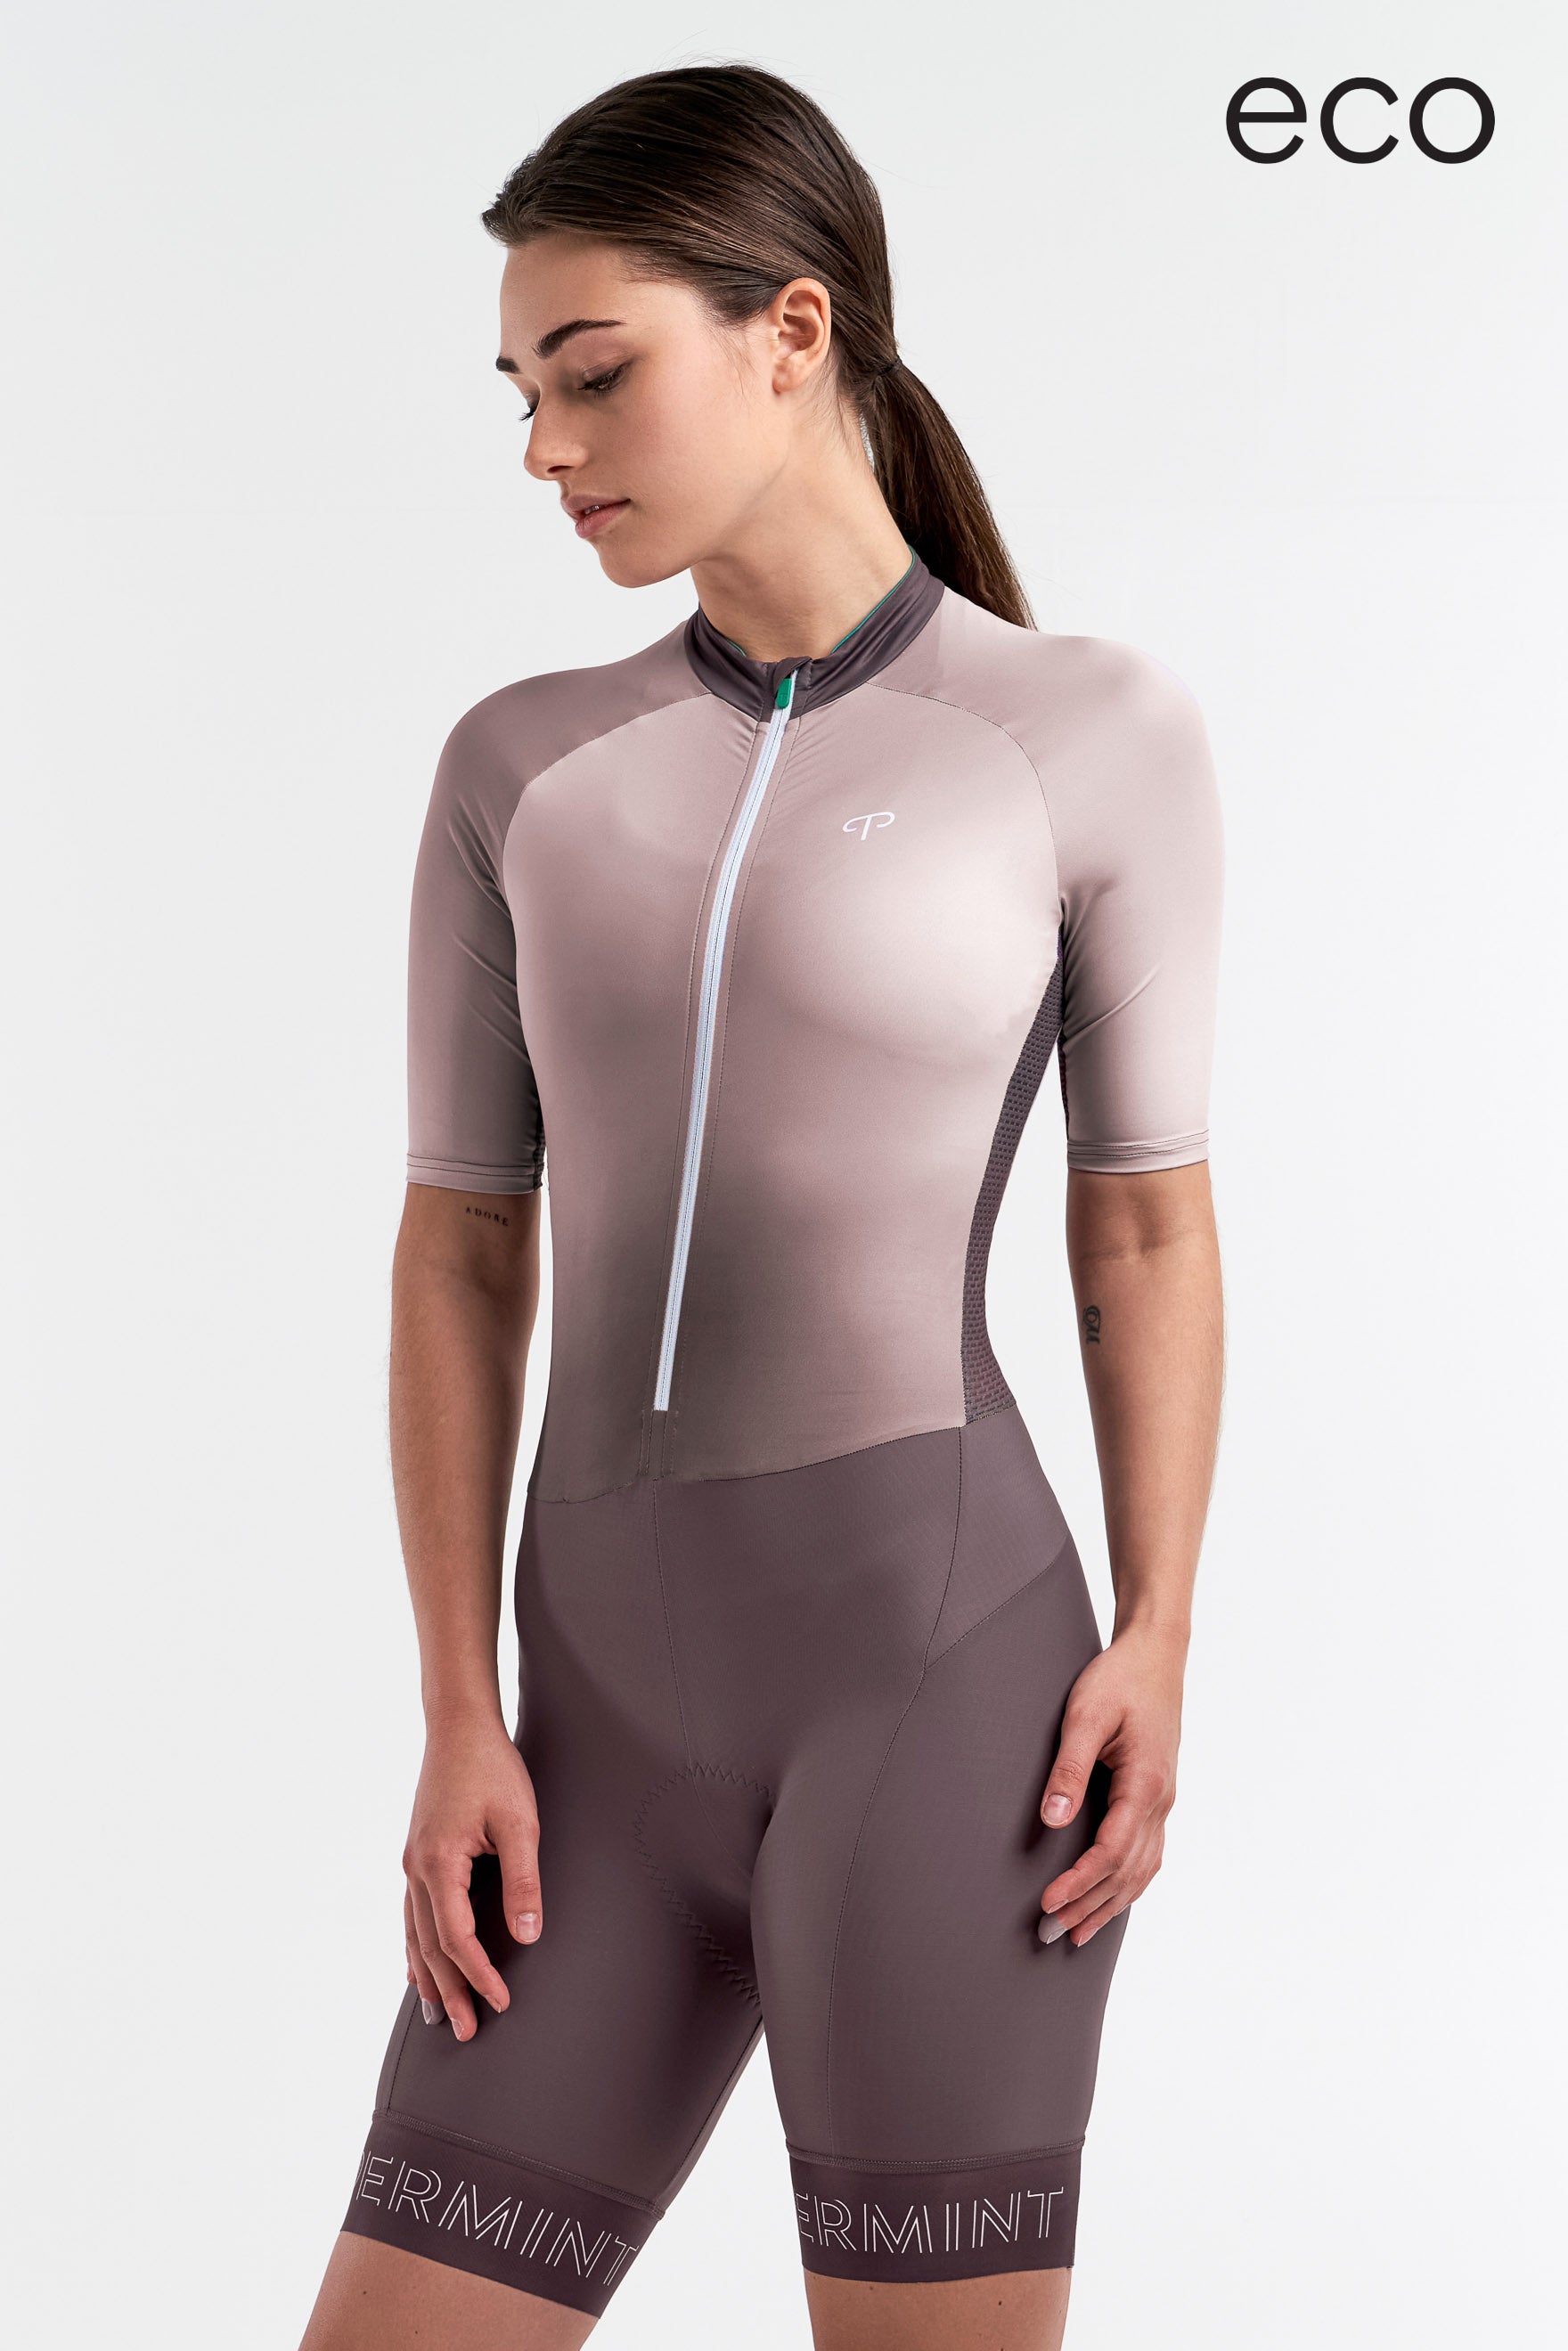 Triathlon Kit - excellent fit, flattering support, well-thought out design